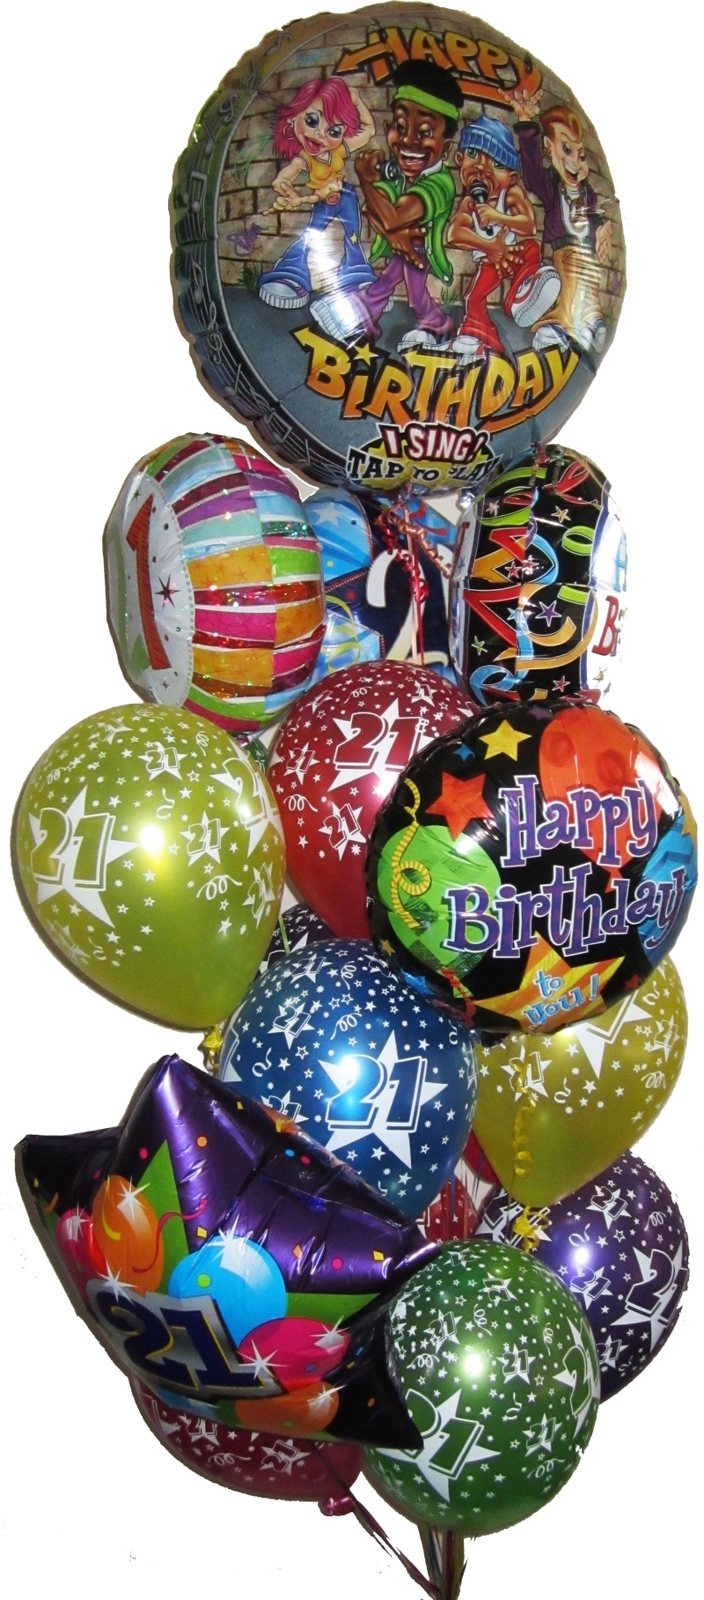 Singing Balloons Helium balloons Perth Rapper Happy Birthday Singing Balloons, Bouquets and